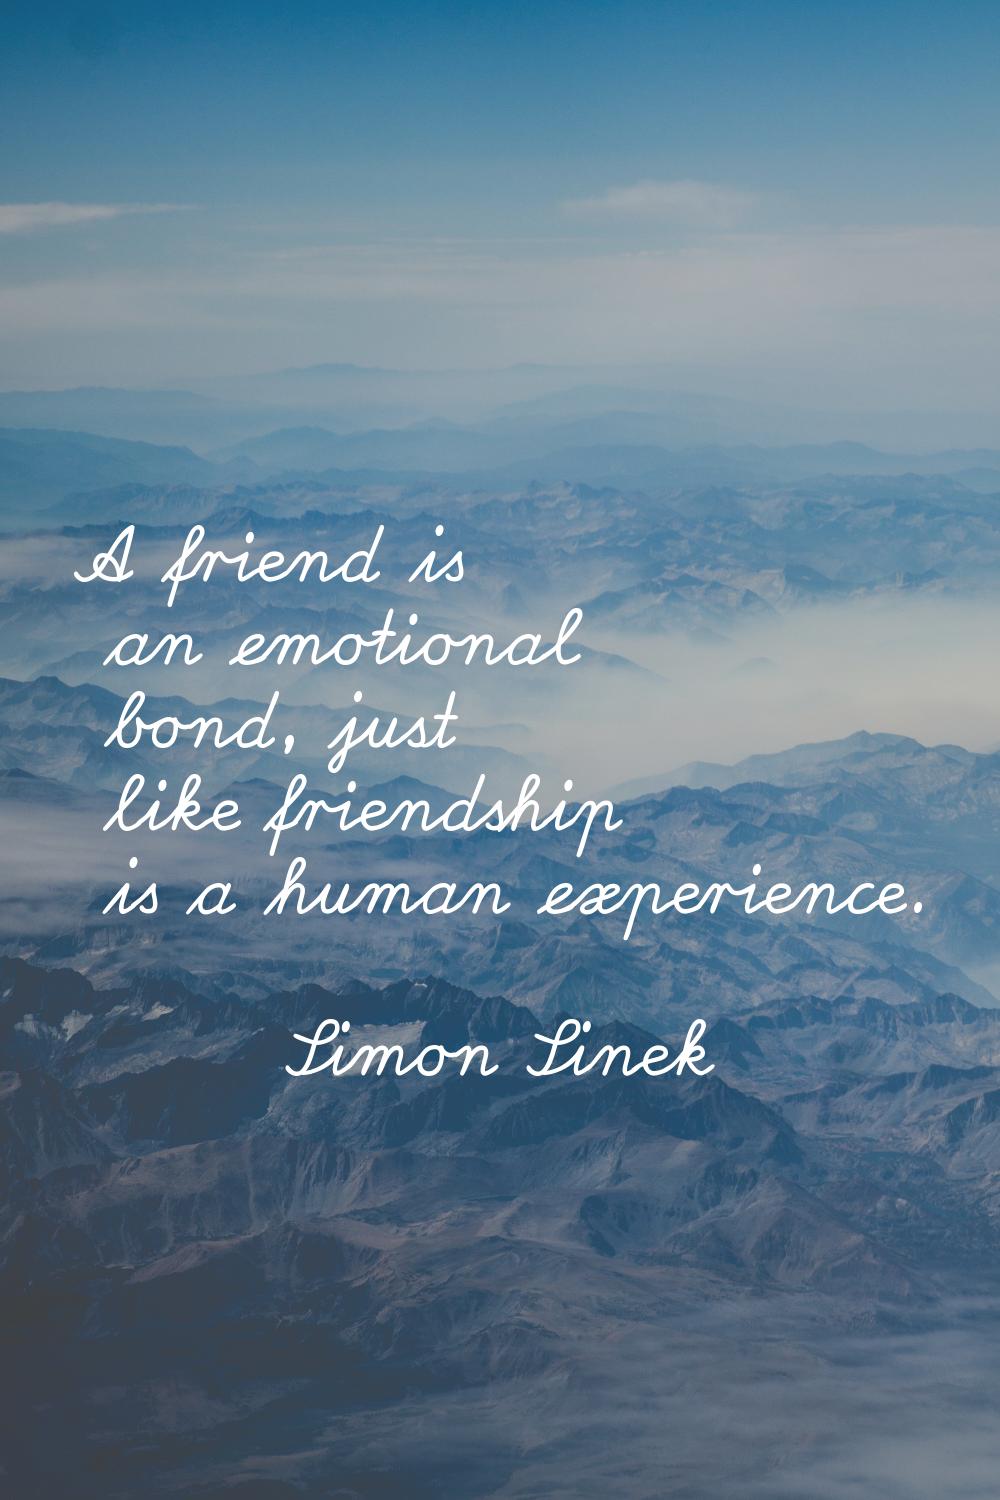 A friend is an emotional bond, just like friendship is a human experience.